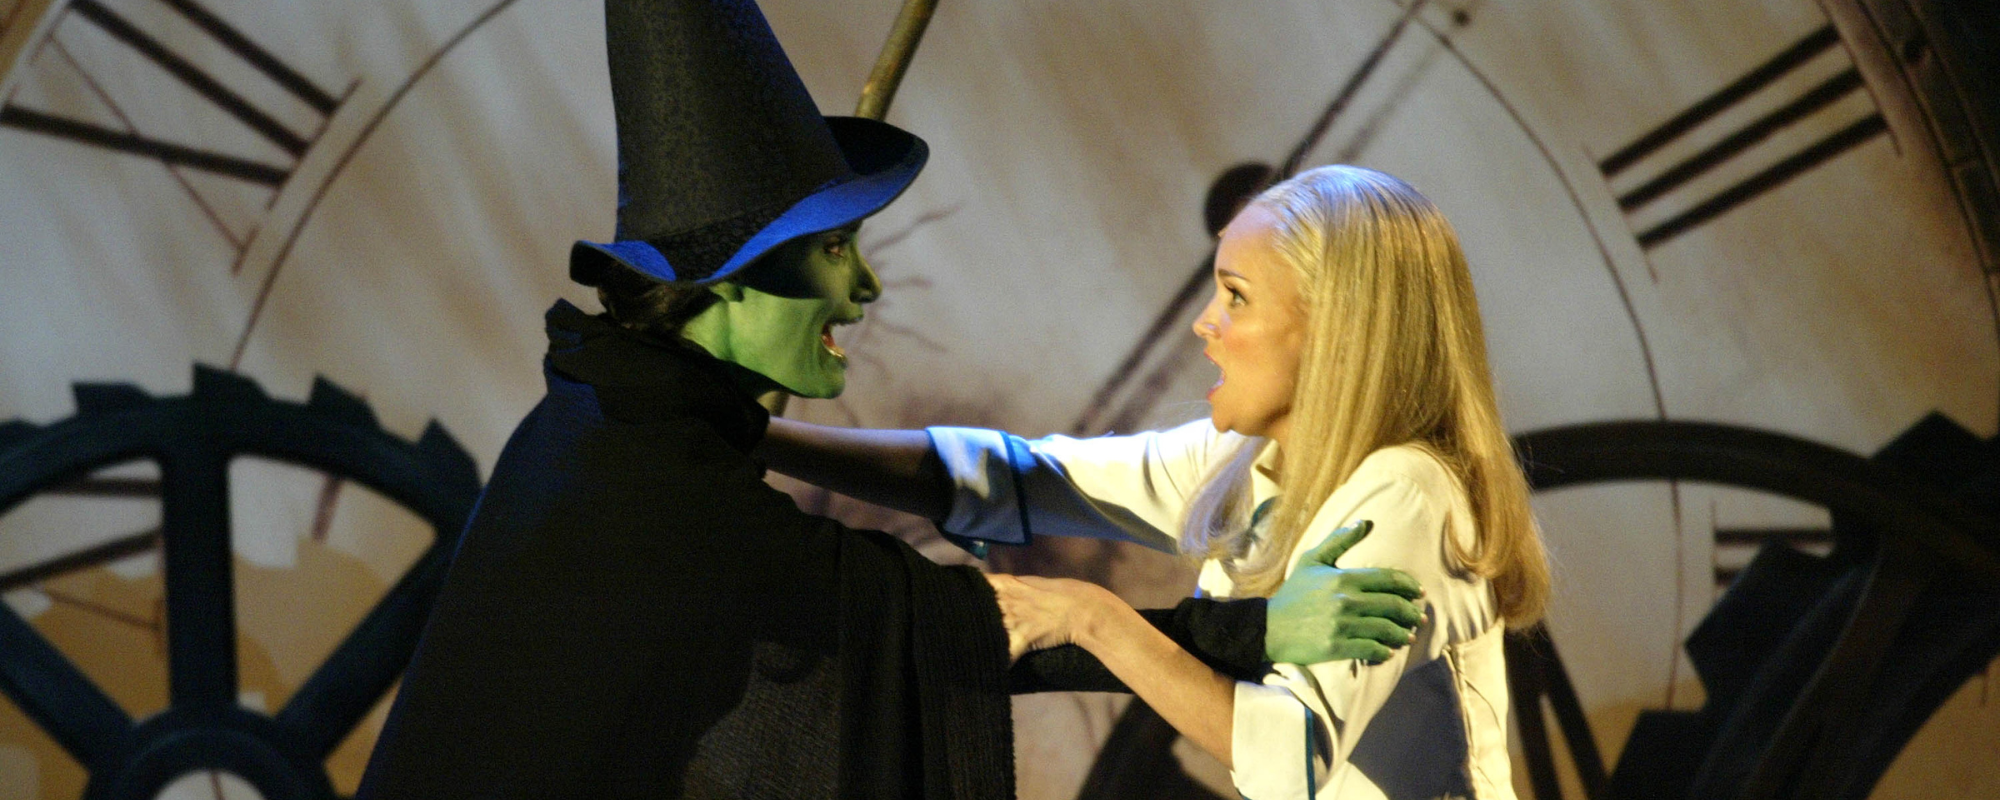 A Complete Guide to the Fabulous Songs in ‘Wicked’